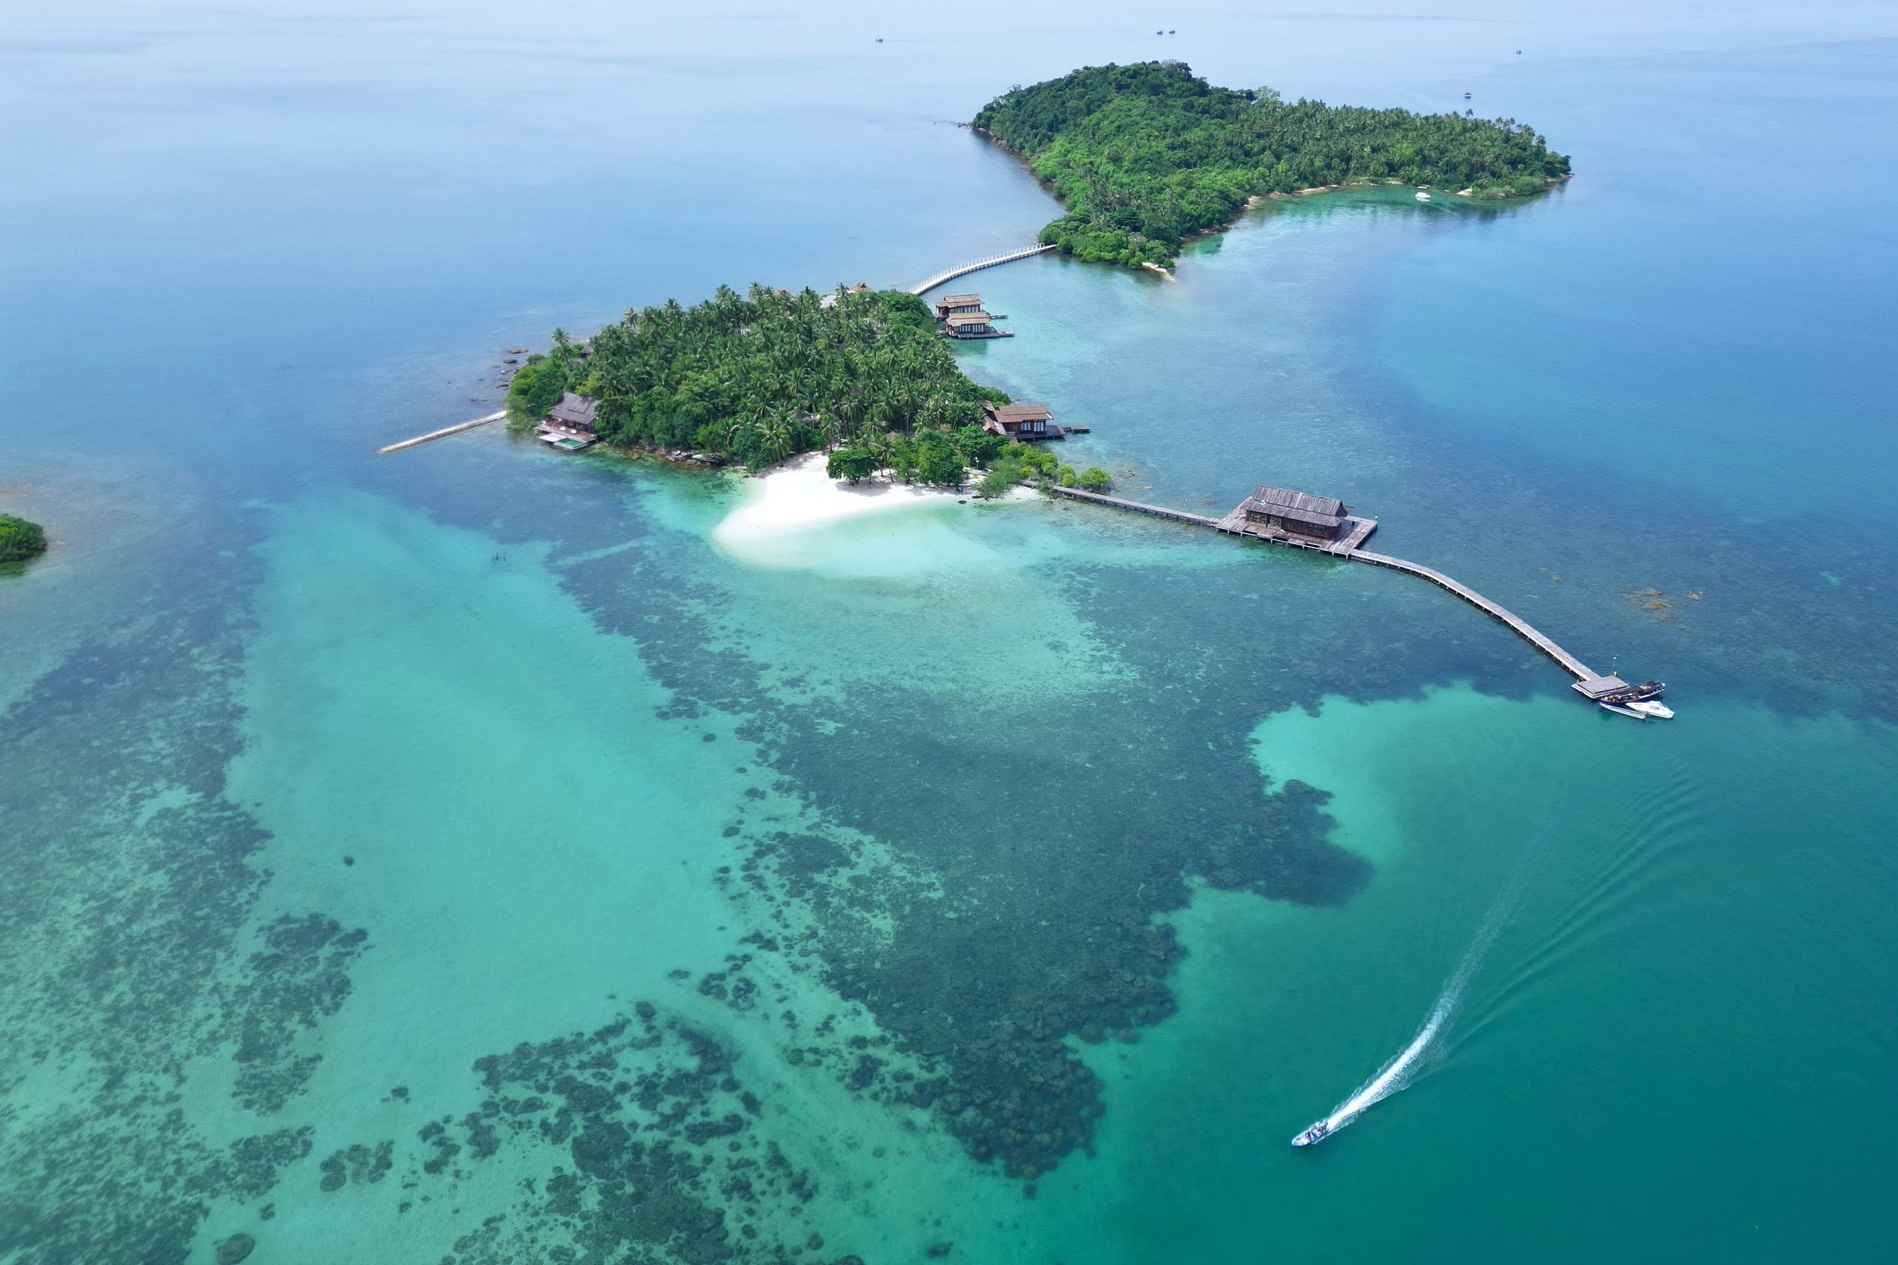 Full Moon Island Resort in Kaoh Sdach, Cambodia. Click to enlarge.